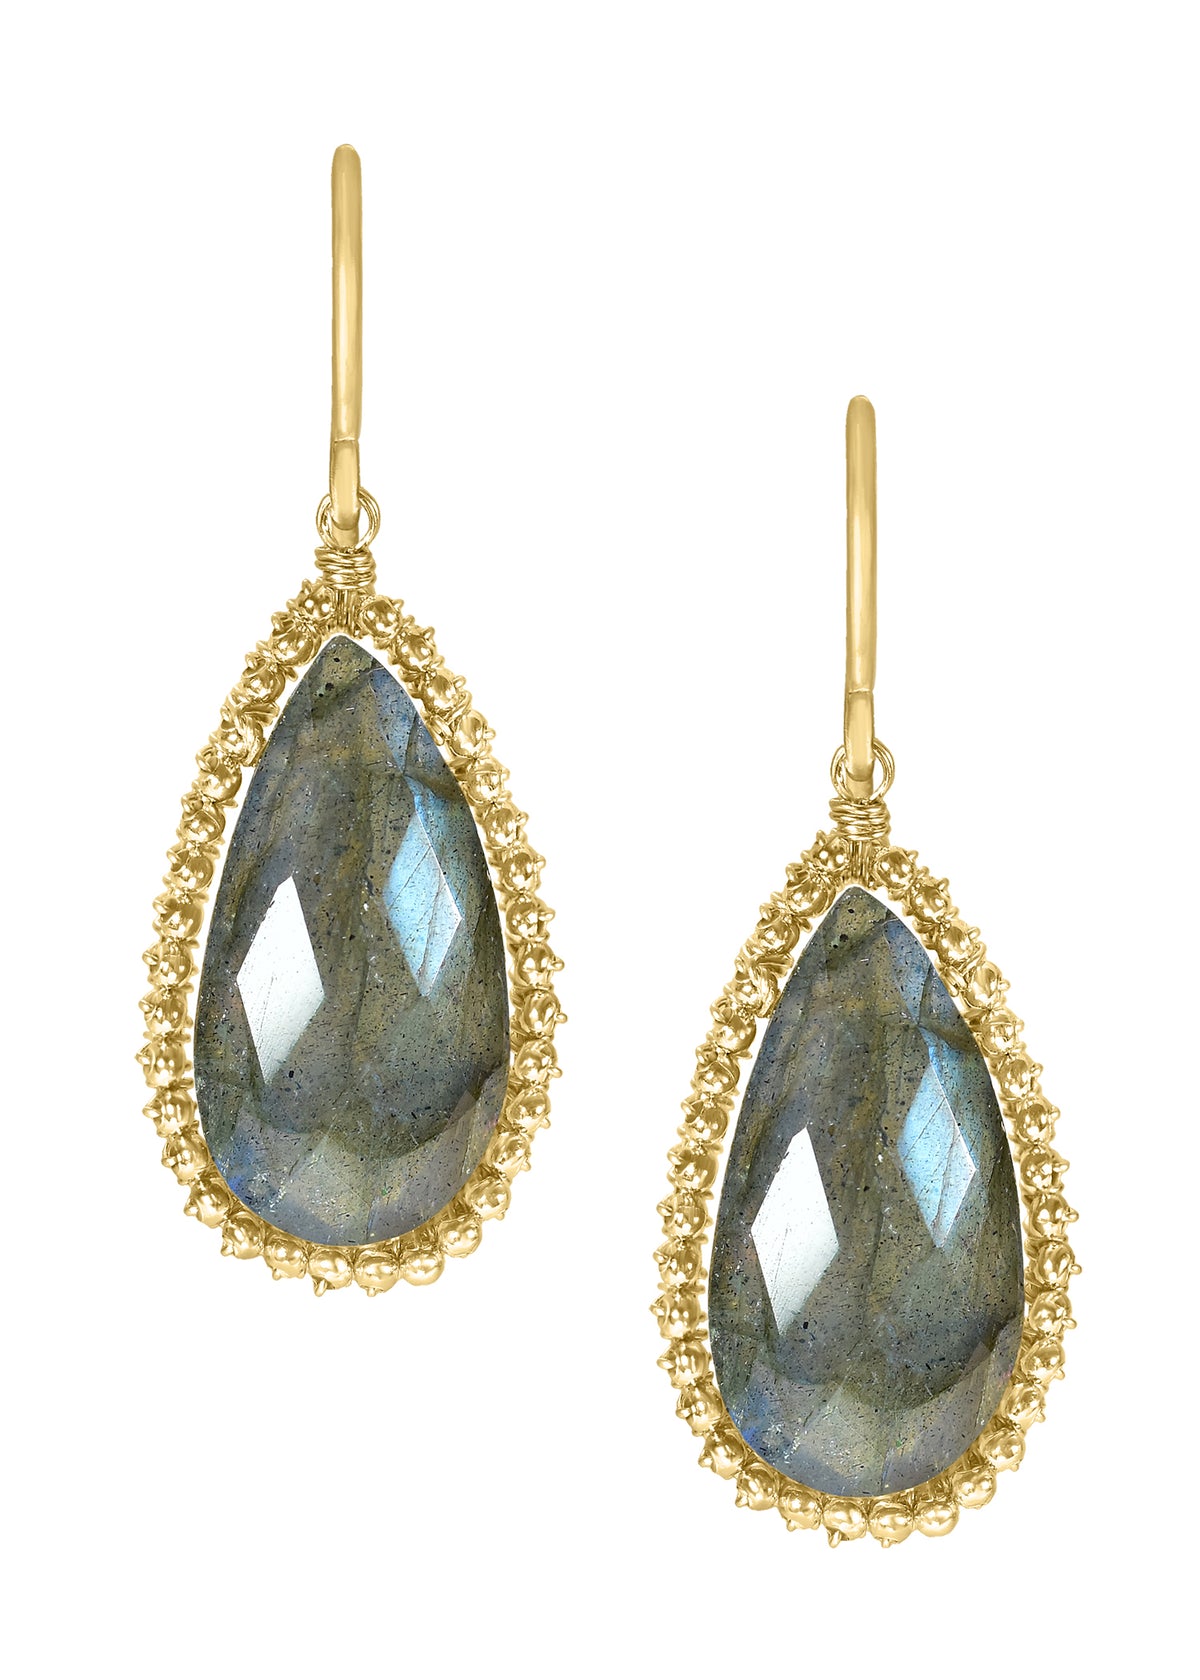 Labradorite 14k gold fill Earrings measure 1-5/16&quot; in length (including the ear wires) and 1/2&quot; in width at the widest point Handmade in our Los Angeles studio